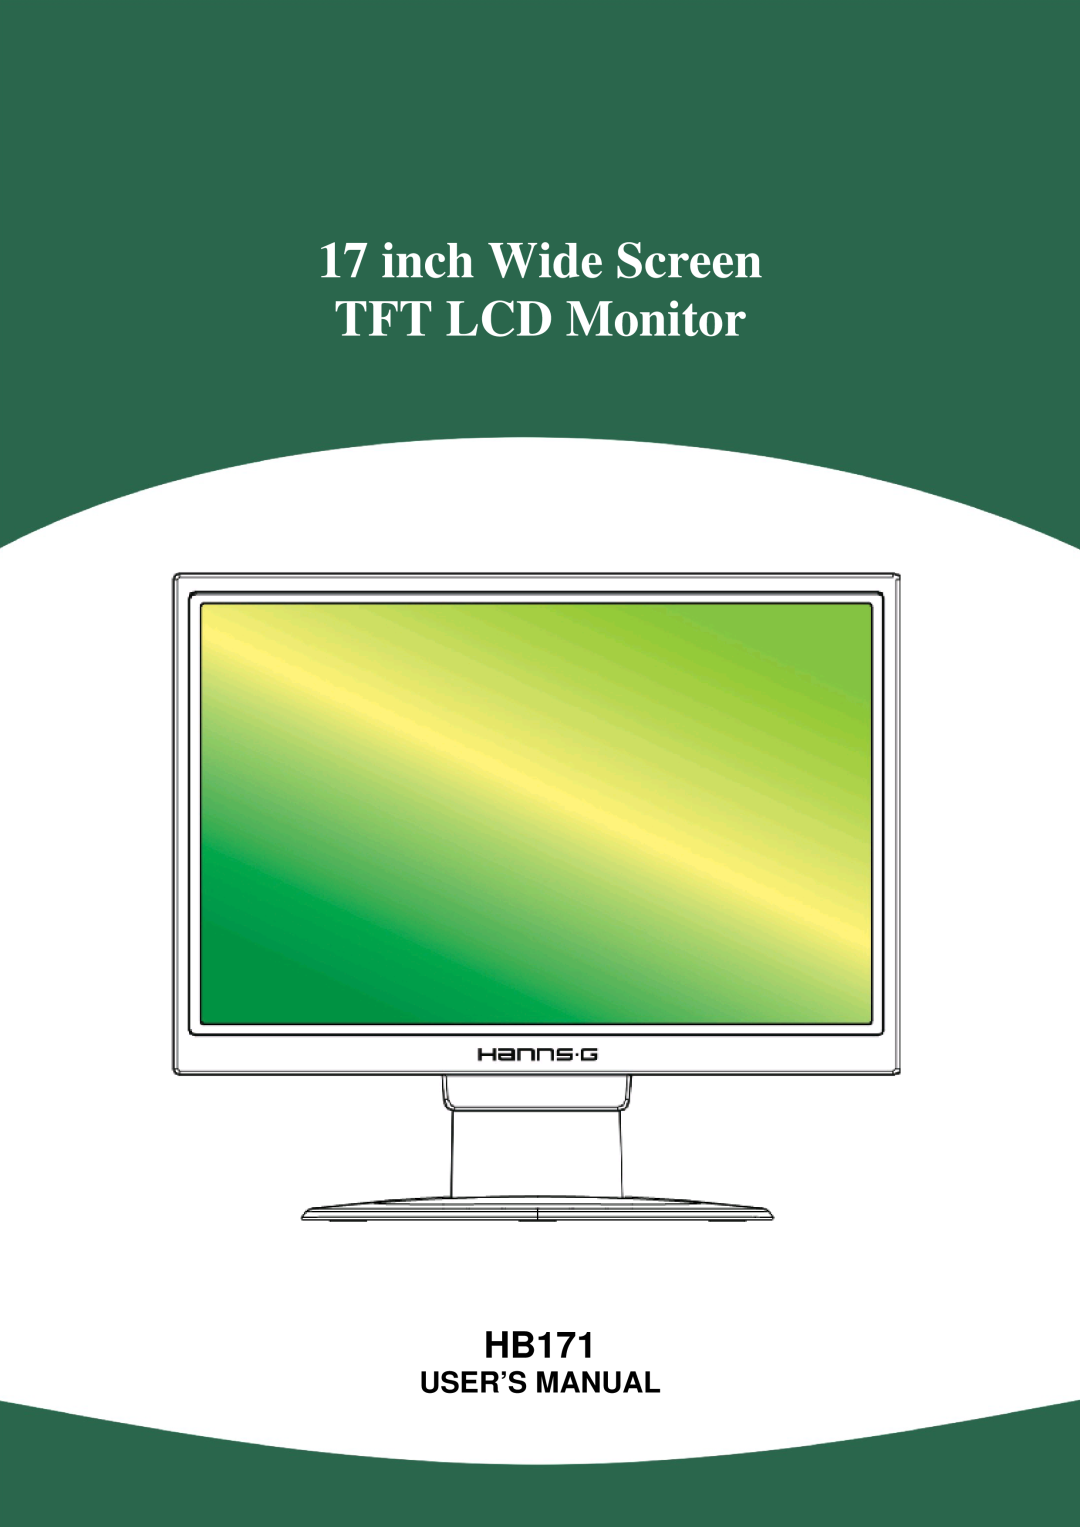 Hanns.G HB171 user manual User’S Manual, inch Wide Screen TFT LCD Monitor 